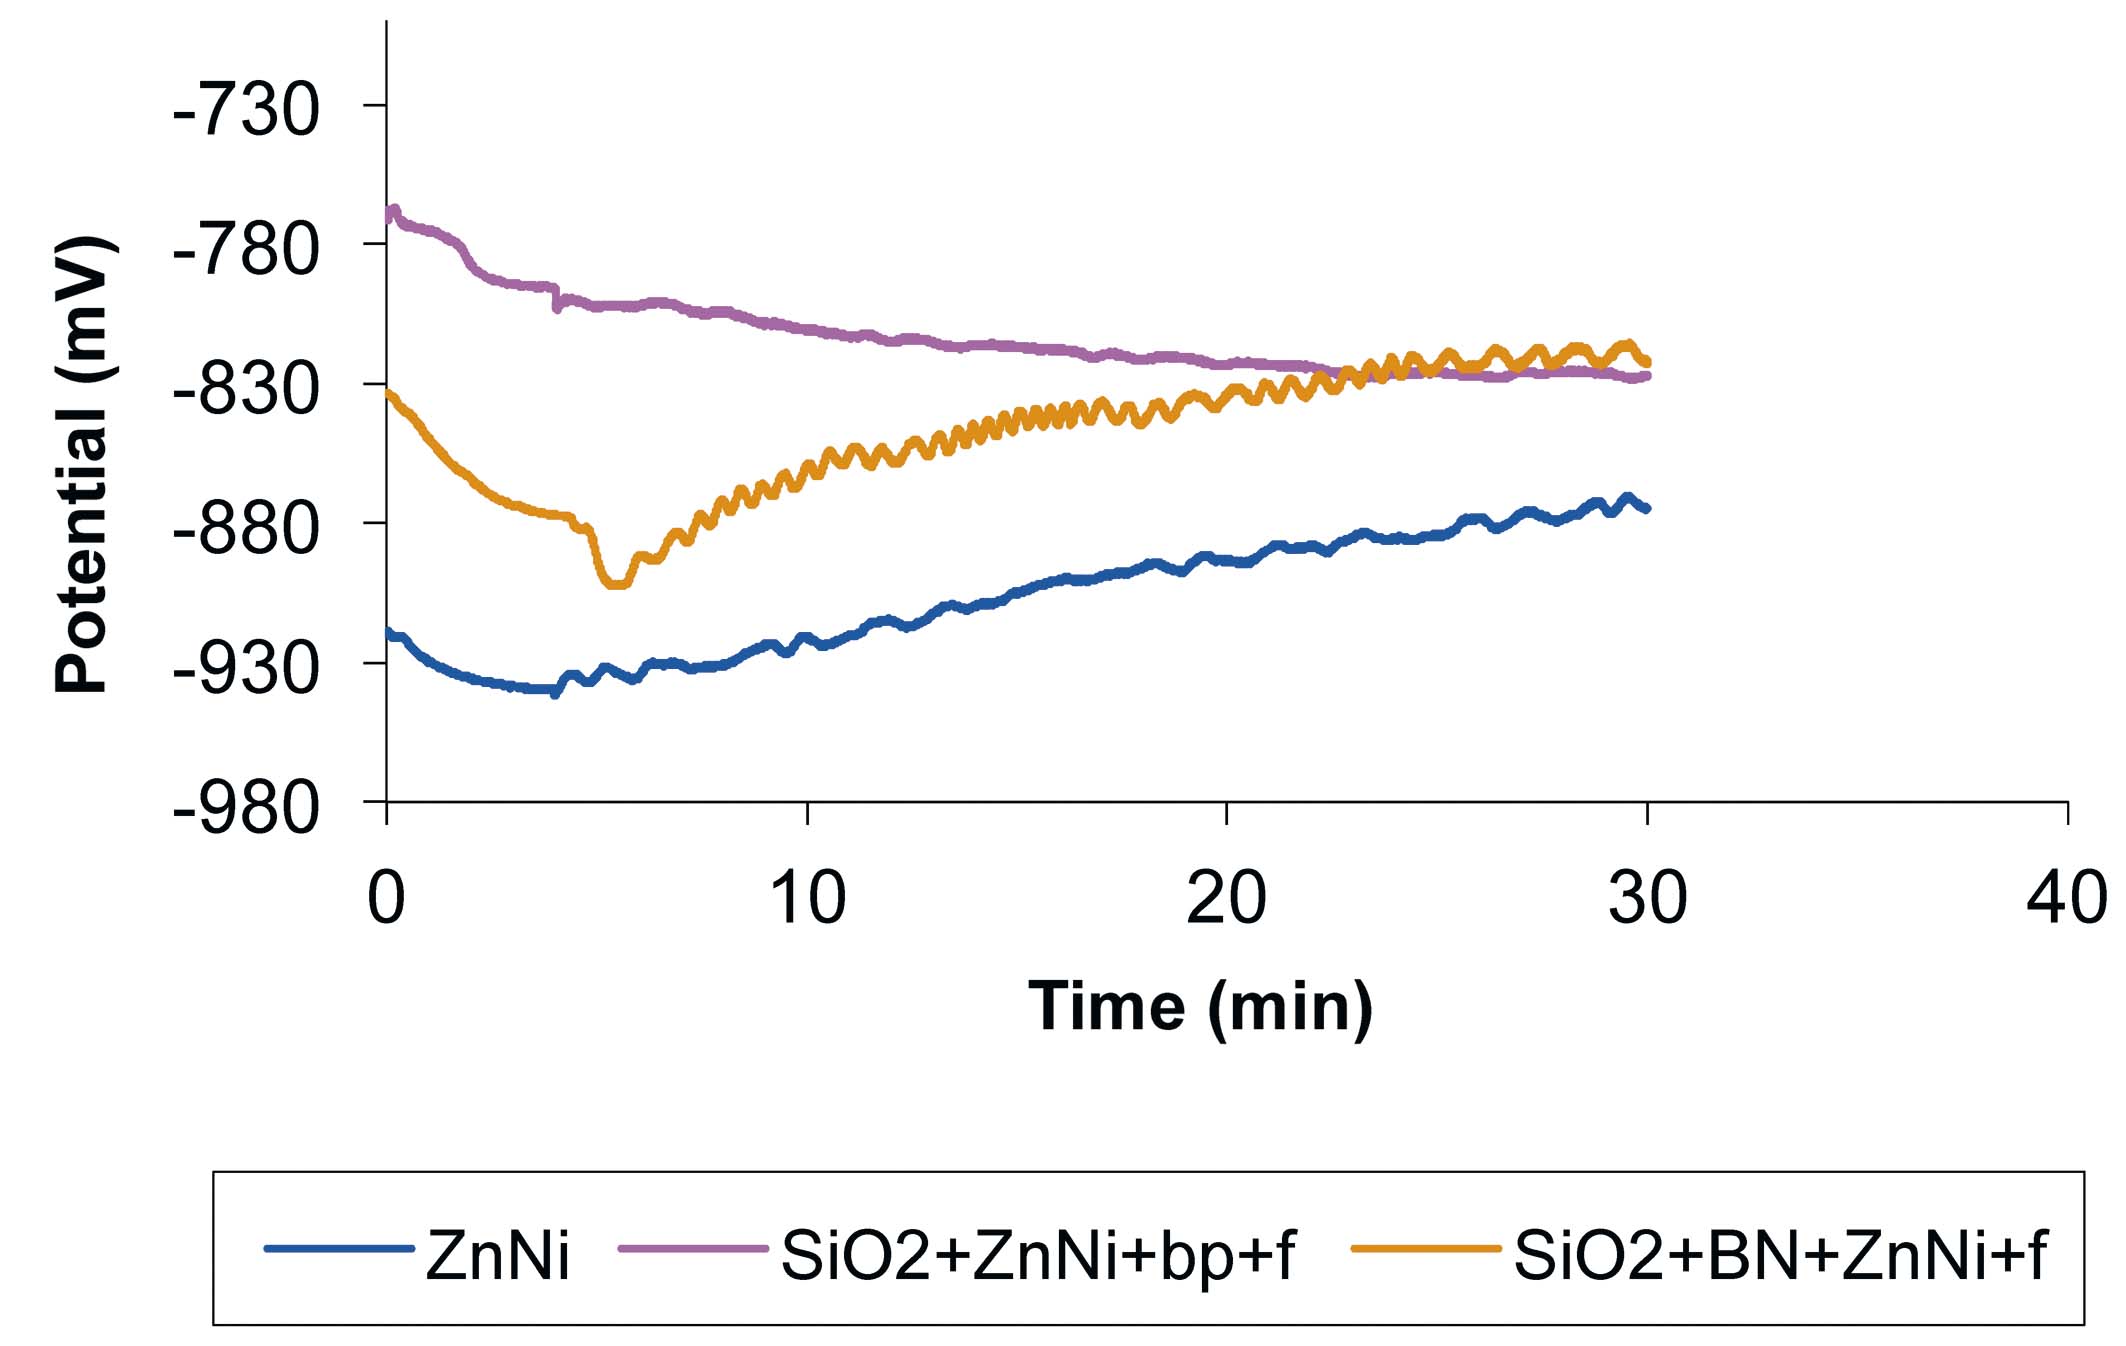 Fig. 5: Open circuit potential variation for: Zn-Ni sample, SiO2+Zn-Ni+bp+f sample and SiO2+BN+Zn-Ni+f sample, during tribocorrosion process in 1 % NaCl solution, with the following tribometer parameters: 0.5 Hz, 14 mm, 780 cycles and a normal force of 2 N